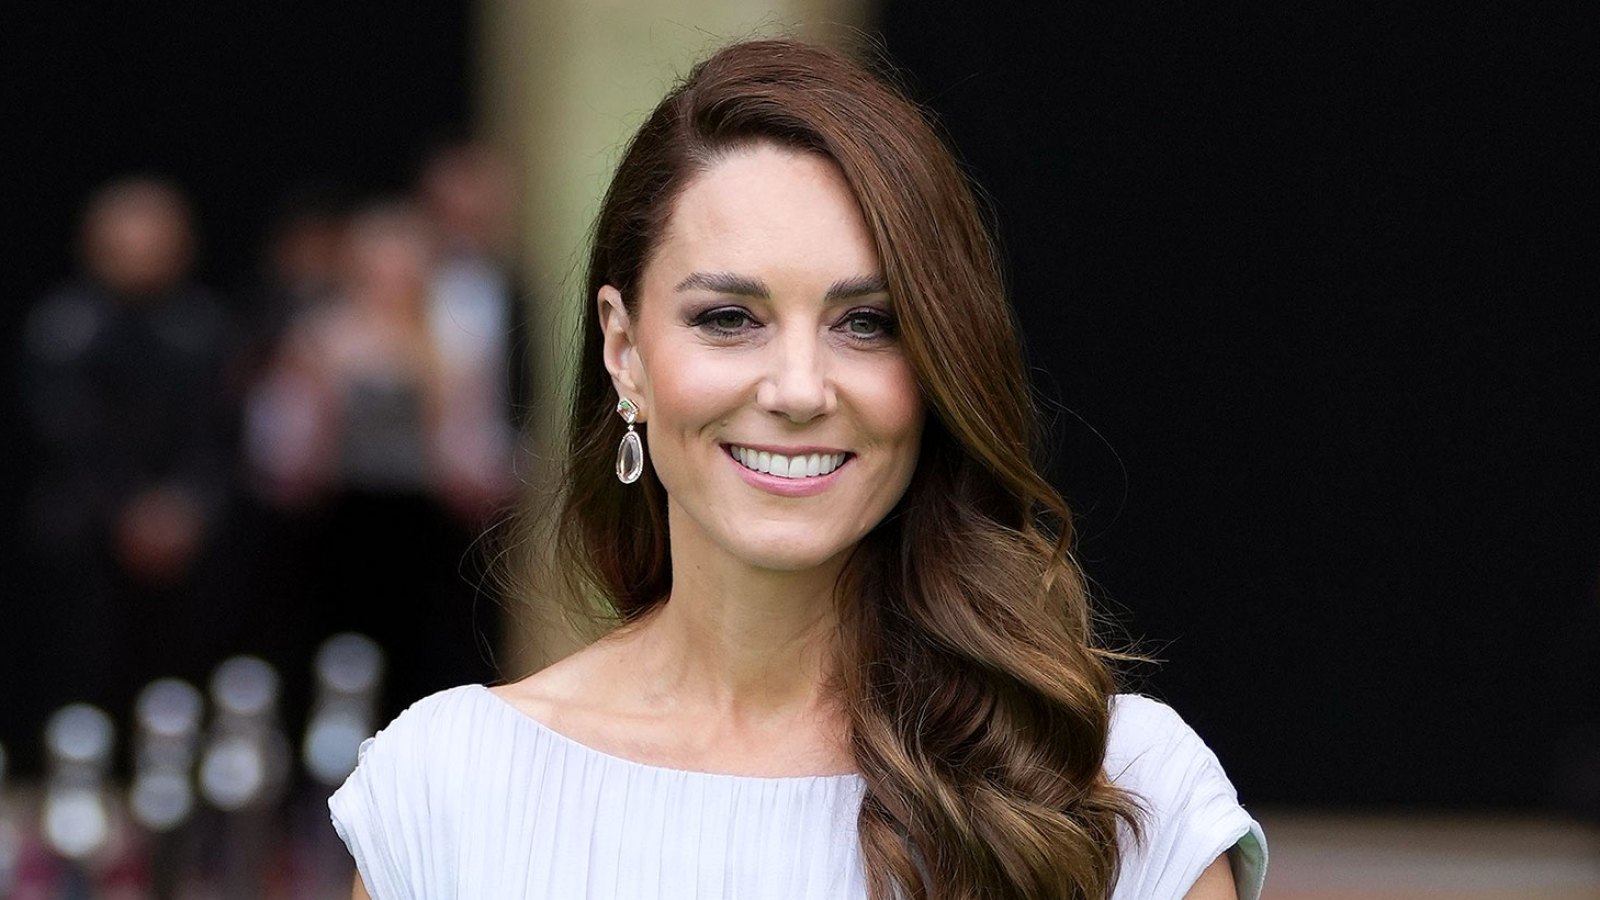 Duchess Kate Middleton Will Have a ‘Lower Key’ 40th Birthday Celebration Compared to Meghan Markle Amid COVID-19 Spike